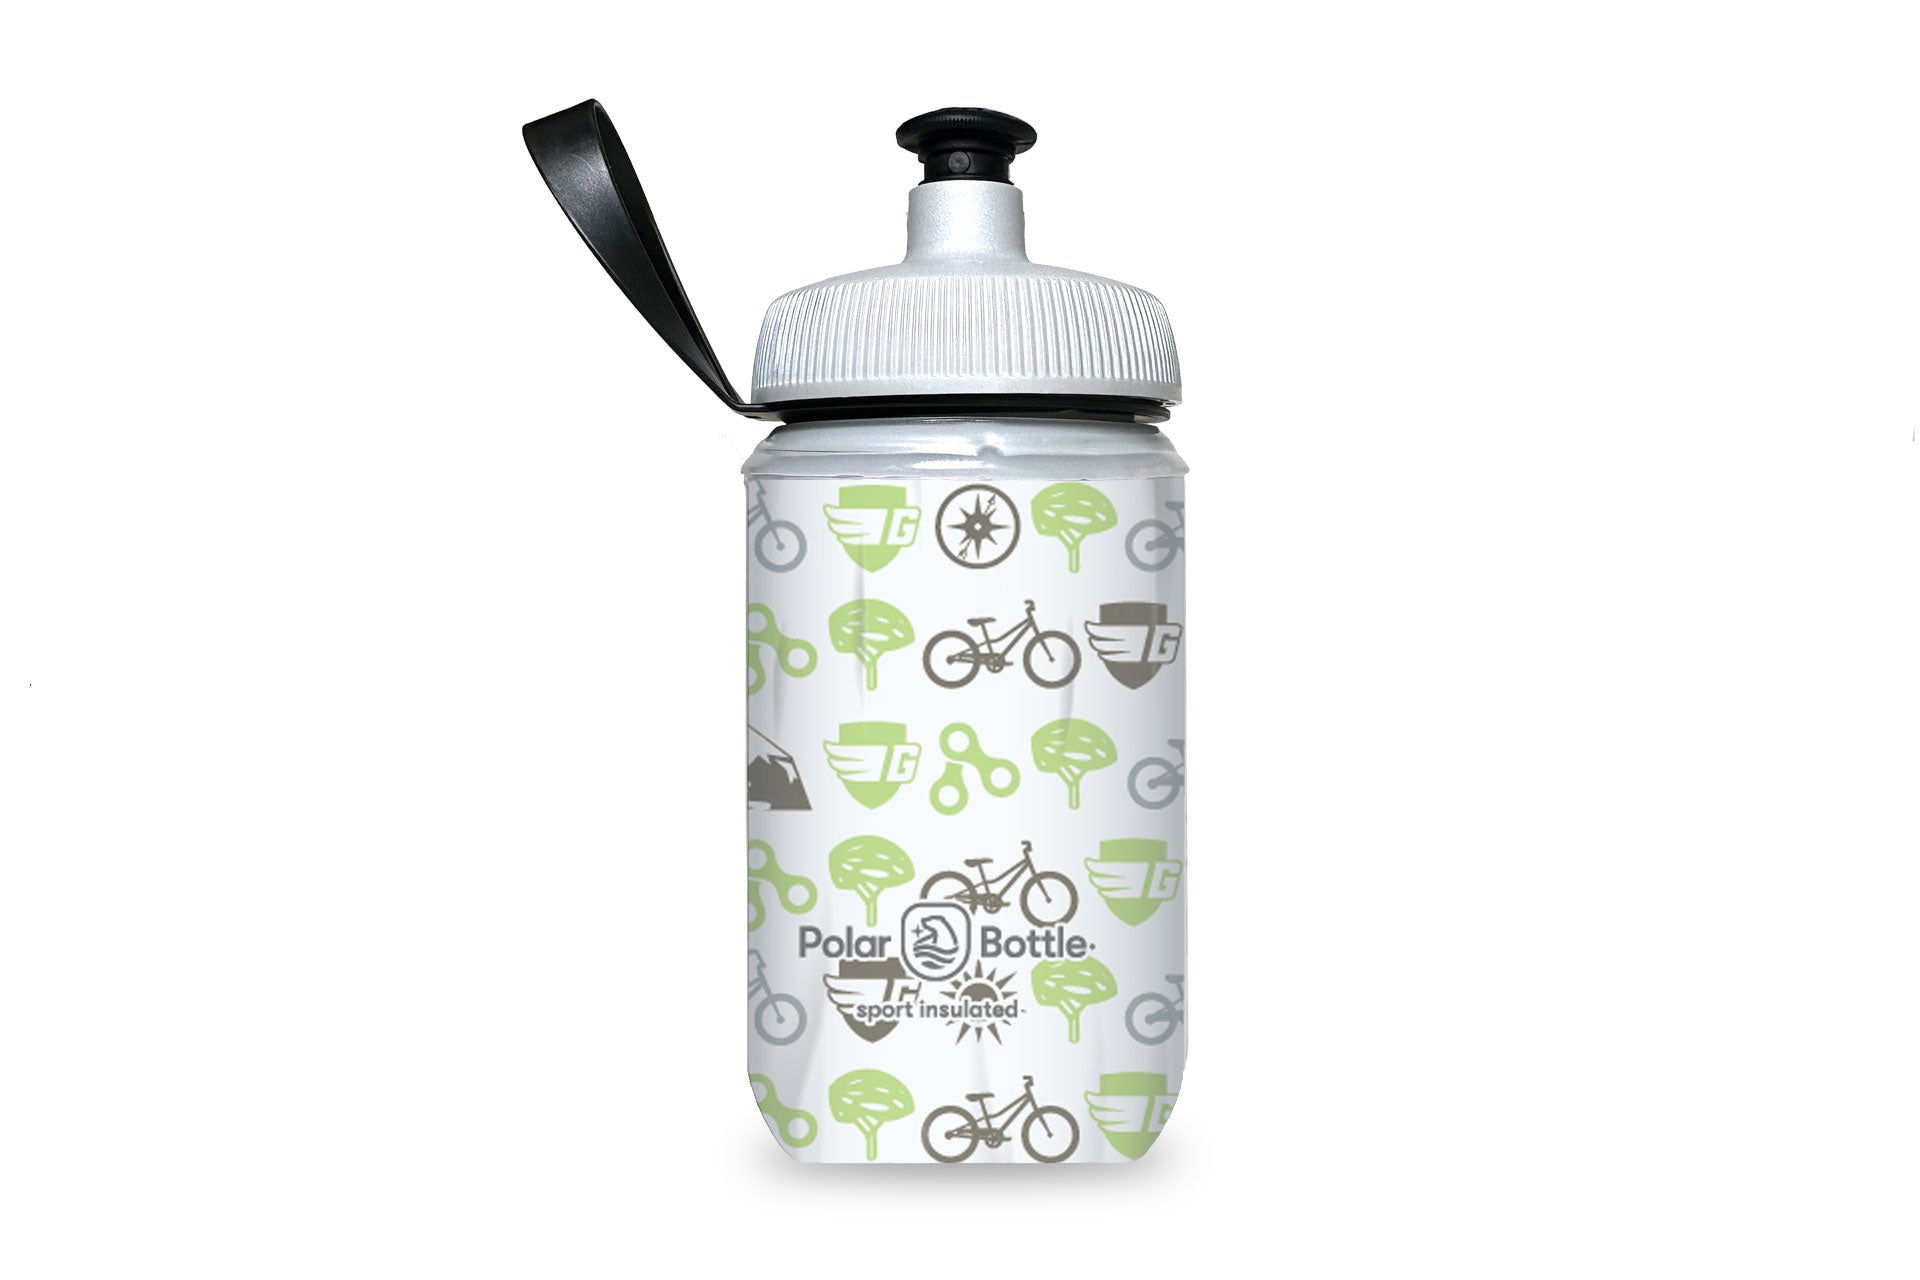 Polar Bottle 24 oz. Insulated Water Bottle - Buys with Friends